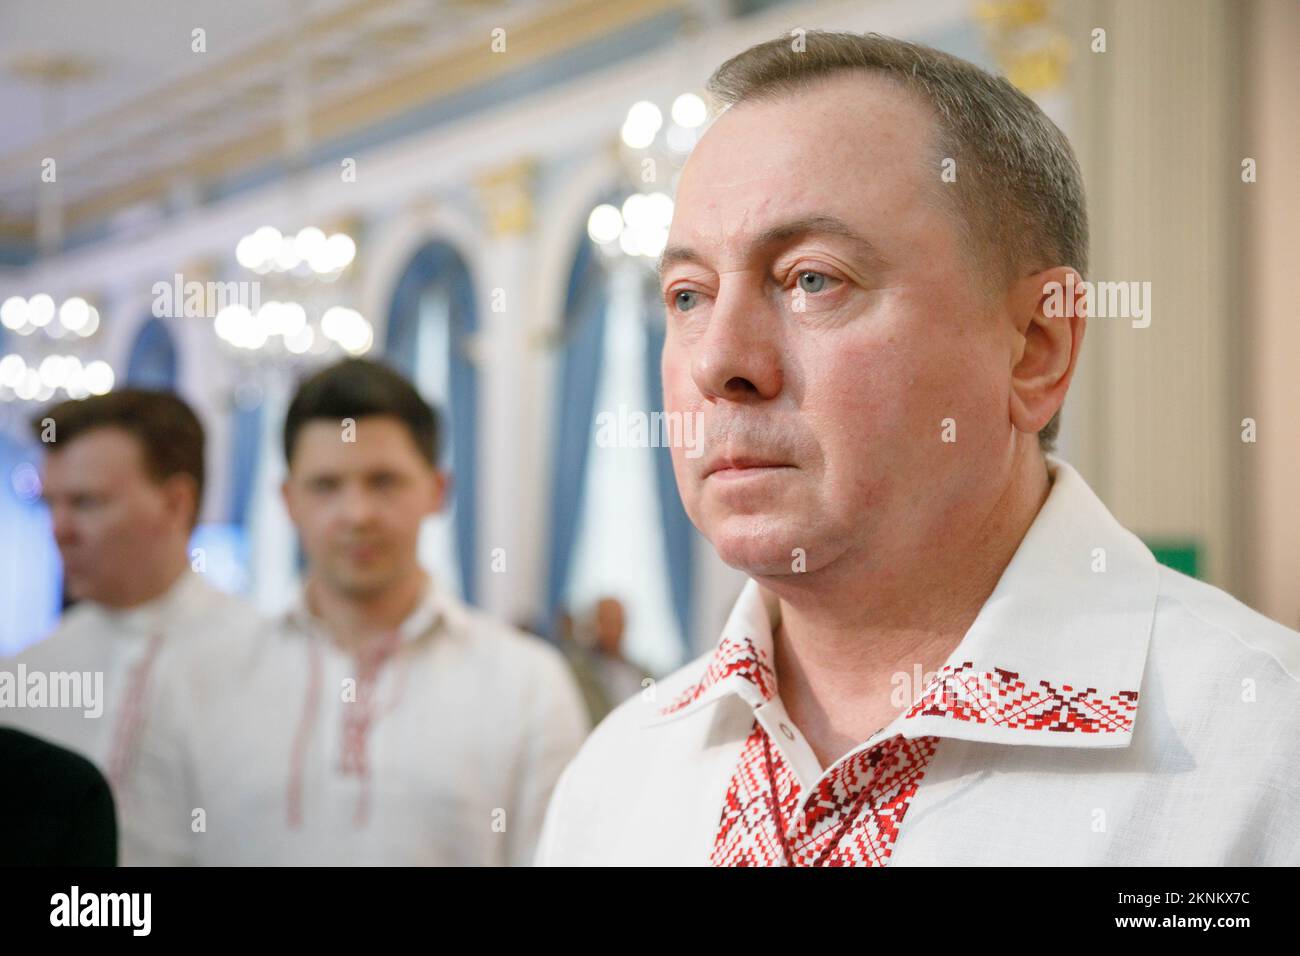 The Minister of Foreign Affairs of the Republic of Belarus Vladimir Makei (or Uladzimir Makiej) wearing a vyshyvanka, a traditional Belarusian embroidered shirt, looks at the journalists during the event called In Belarus Like At Home, organized by his Ministry for foreign diplomats. Vladimir Vladimirovich Makei (or Uladzimir Makiej) died in Minsk on November 26, 2022. He was 64 years old. There is no information that he had a chronic illness. Belarusian authorities did not state his cause of death. Makei served as the Minister of Foreign Affairs of Belarus from 2012 till his death in 2022. Si Stock Photo